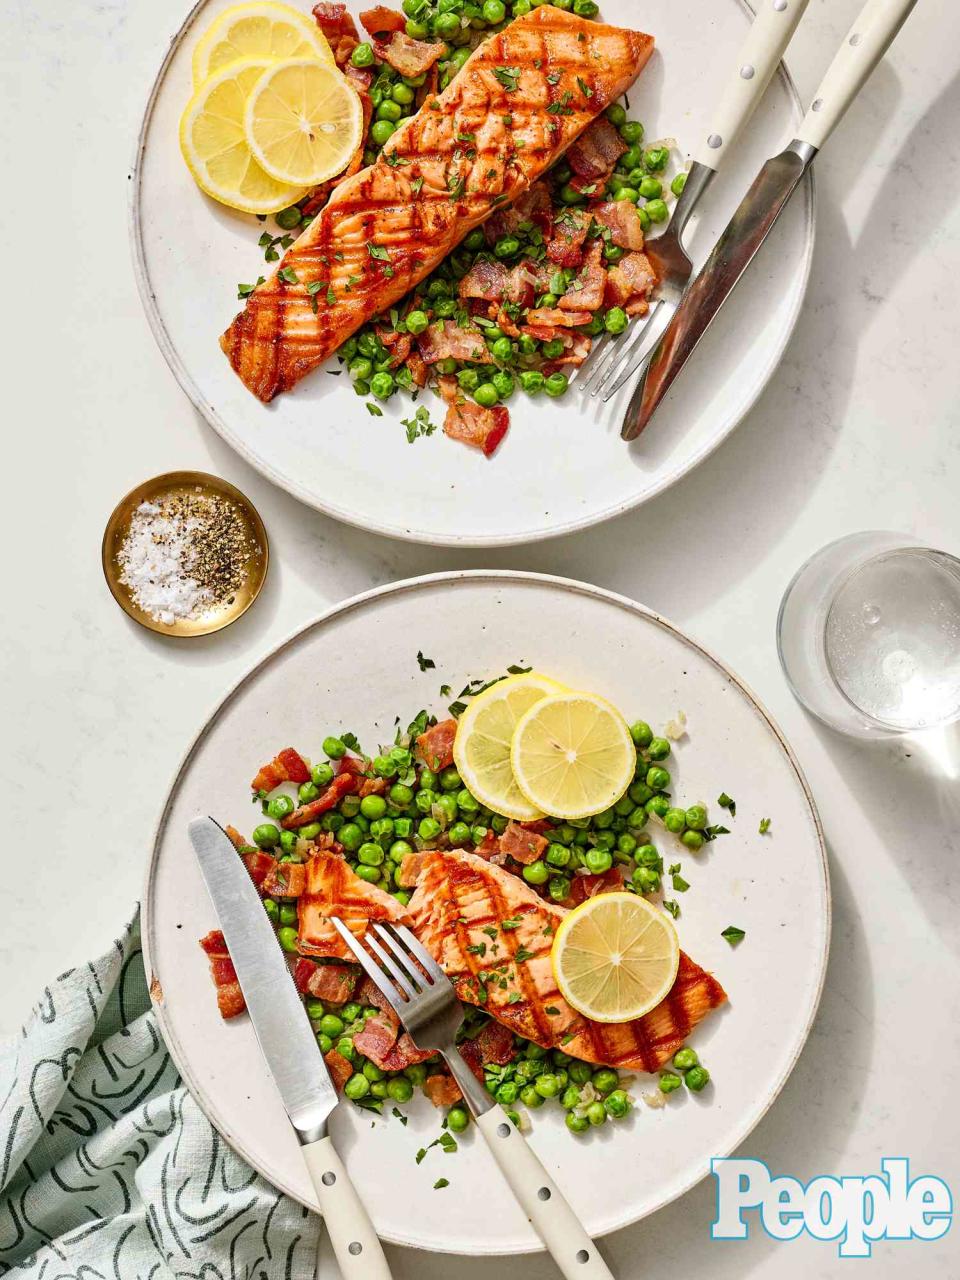 <p>Fred Hardy II</p> Eric Ripert’s Grilled Salmon with Bacon and Peas